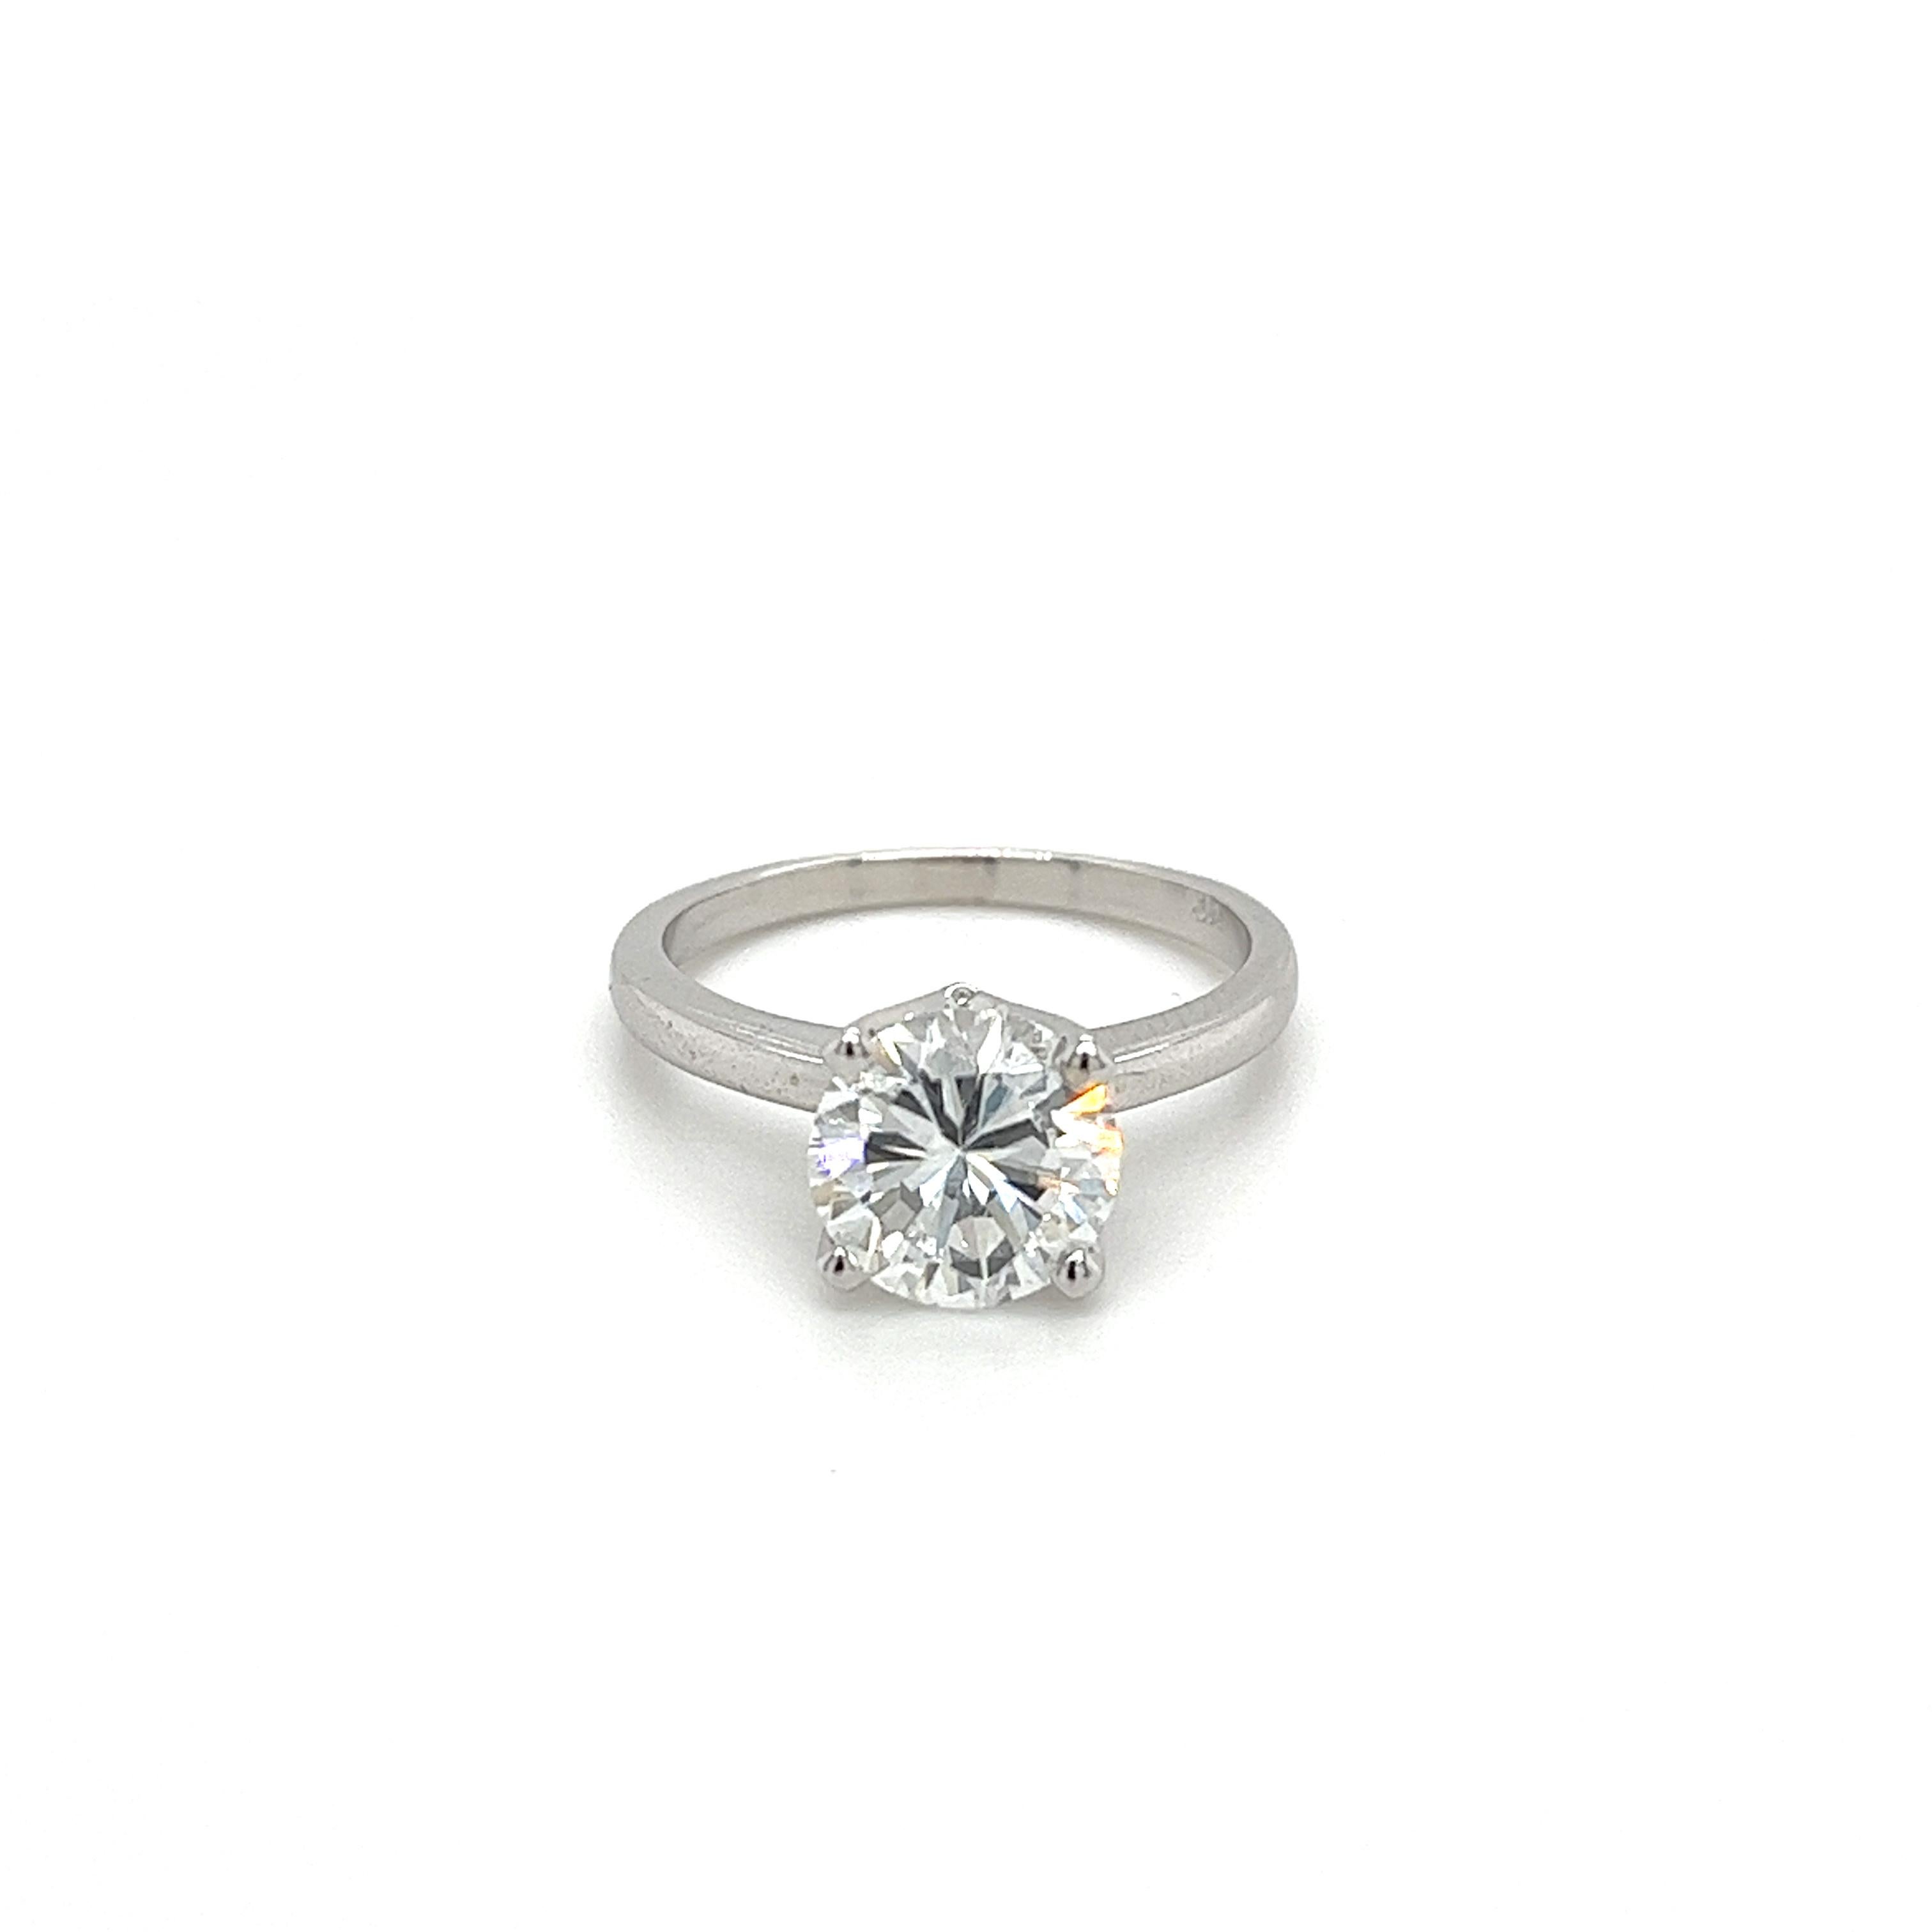 Round Cut GIA Certified 2.02 Carat D color VVS2 Clarity Diamond Solitaire White Gold Ring For Sale